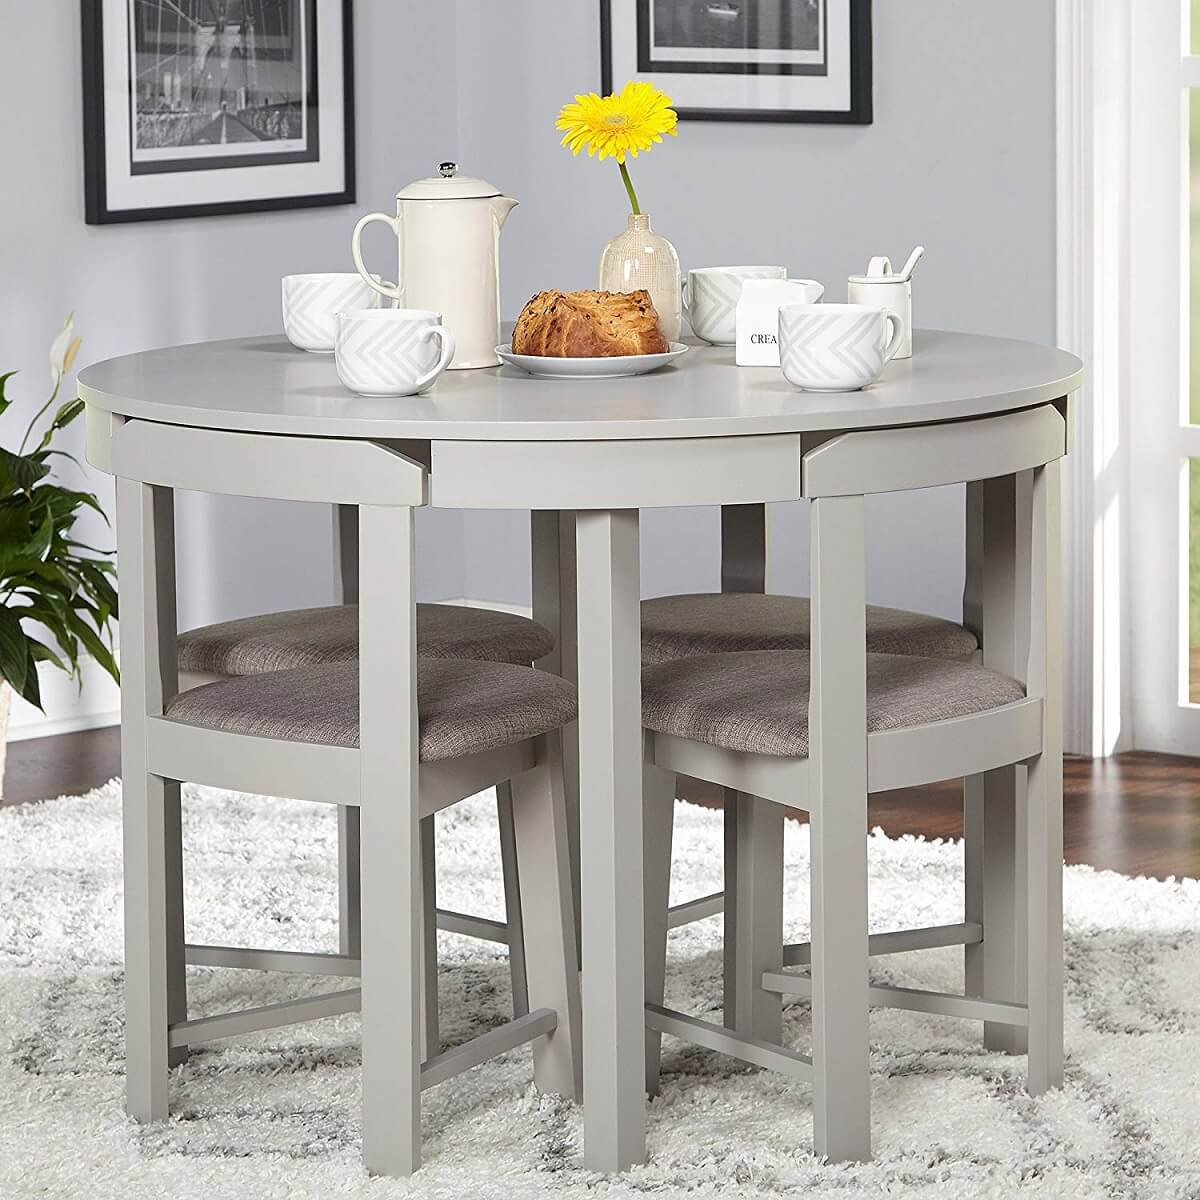 Small Round Kitchen Table Set
 19 Small Kitchen Tables For Conserving Space • Insteading